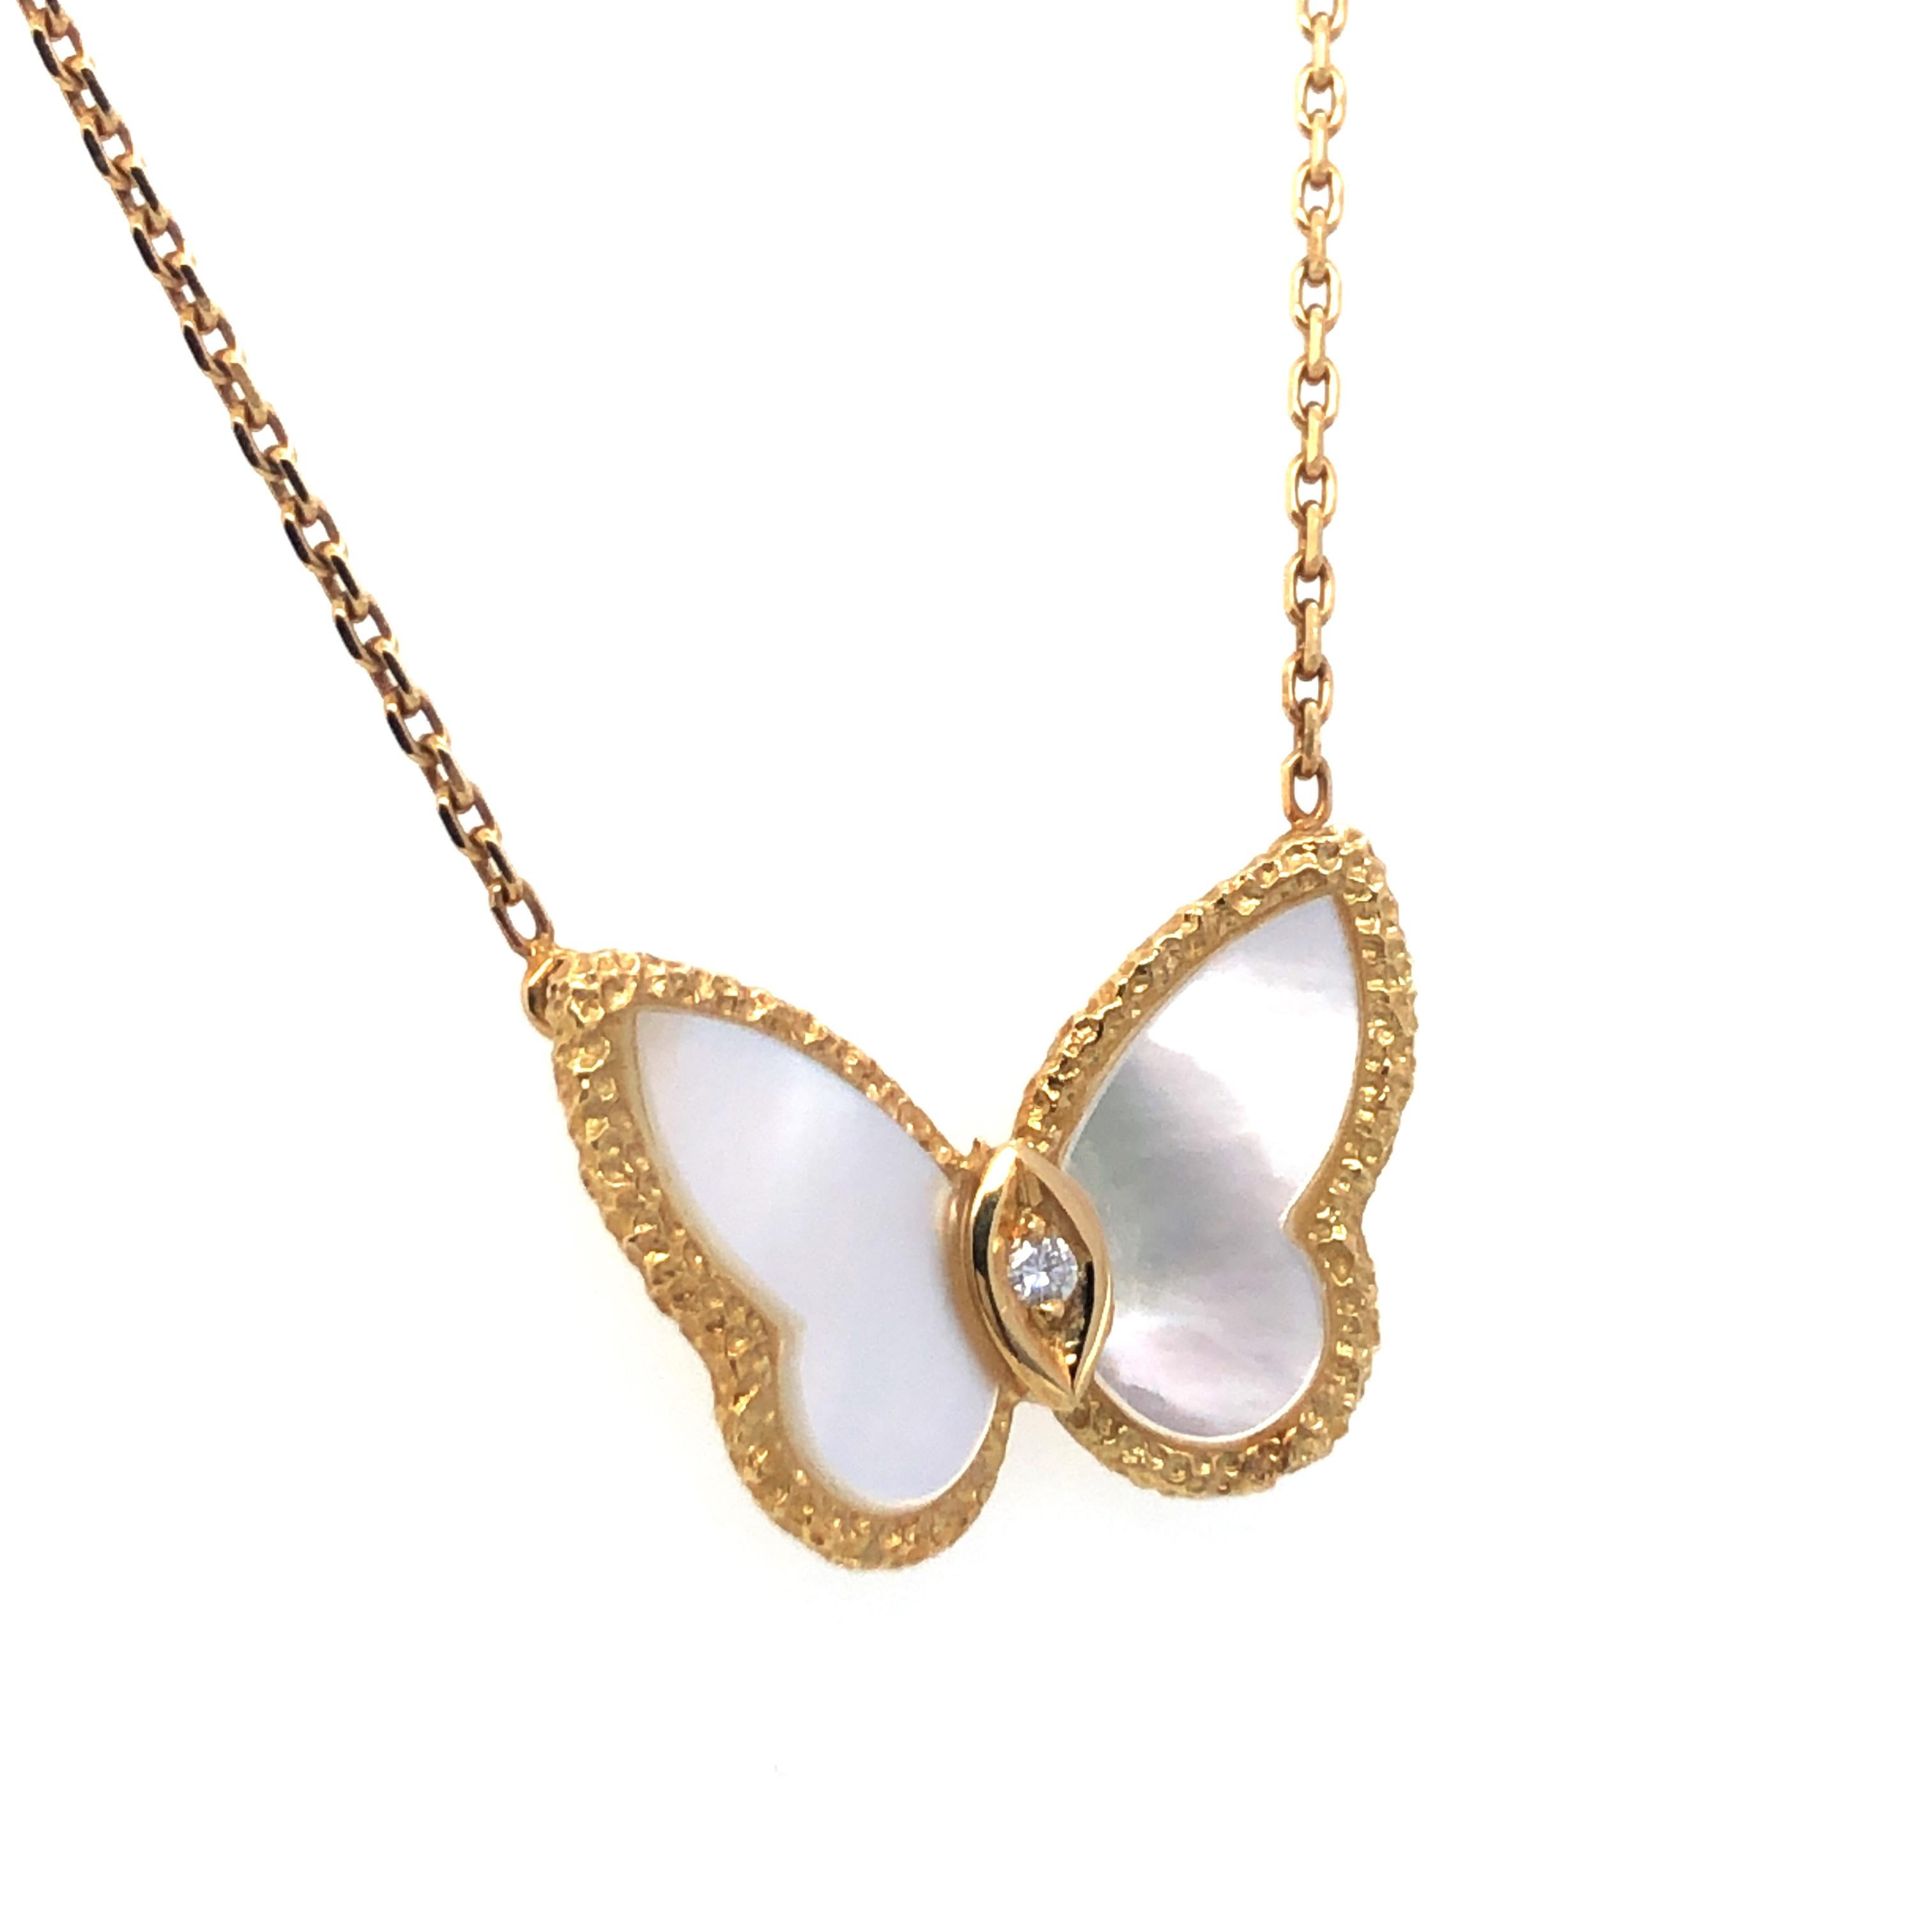 This charming necklace by Van Cleef & Arpels in 18 karat yellow gold is set with two butterfly shaped mother-of-pearl elements and 1 brilliant-cut diamond of F/G colour and vvs clarity, weight 0.03 carats.

Maker's mark: VCA
Assay mark: 750 and